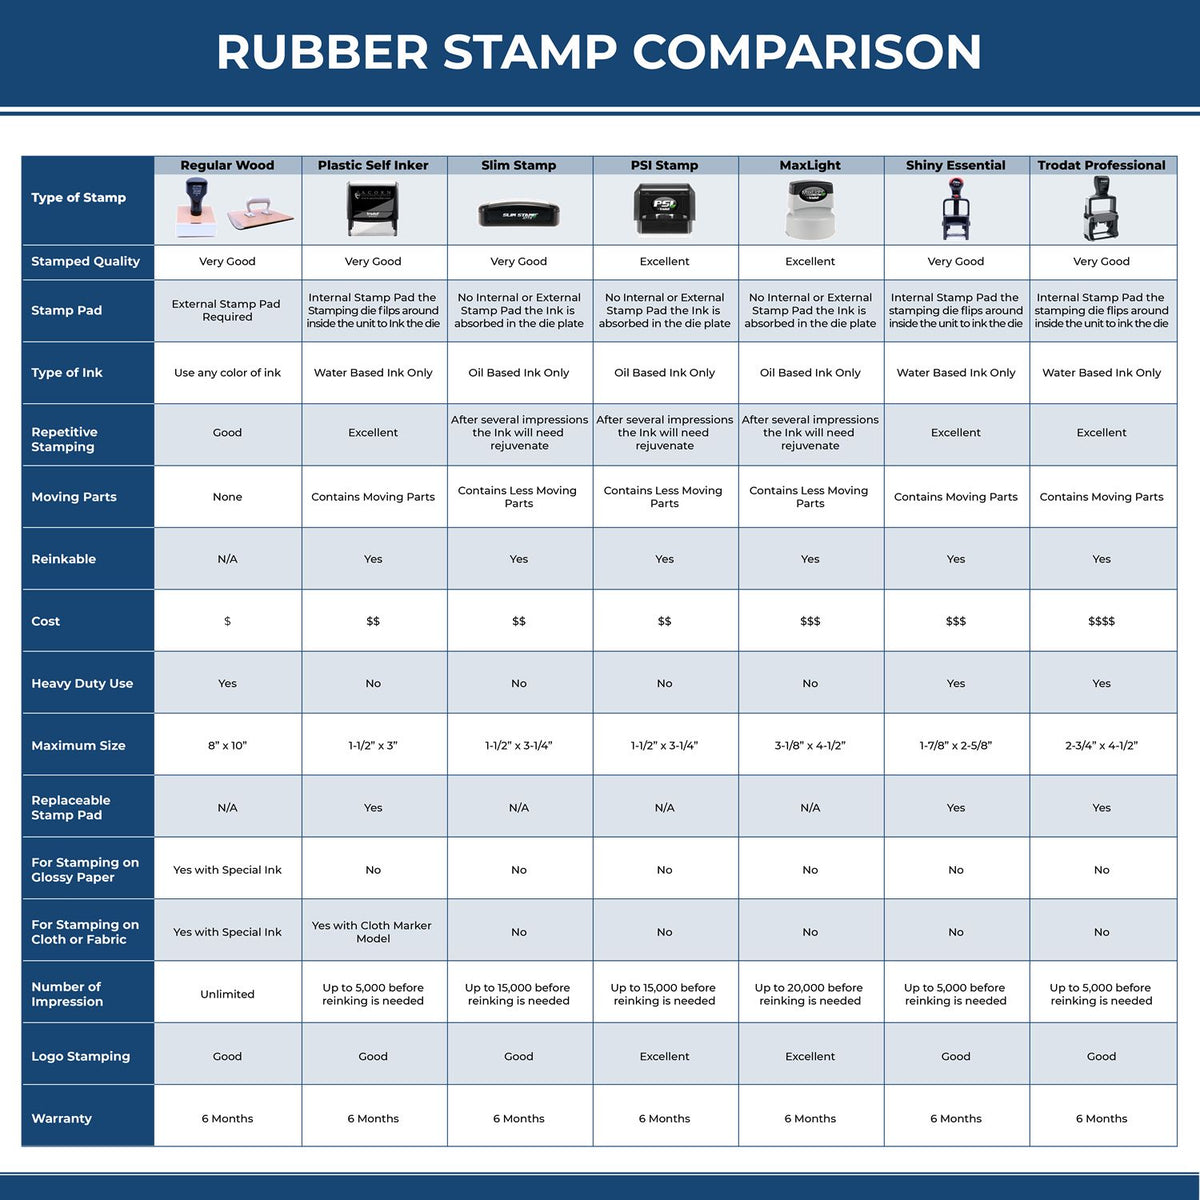 A comparison chart for the different types of mount models available for the Slim Pre-Inked Washington Architect Seal Stamp.